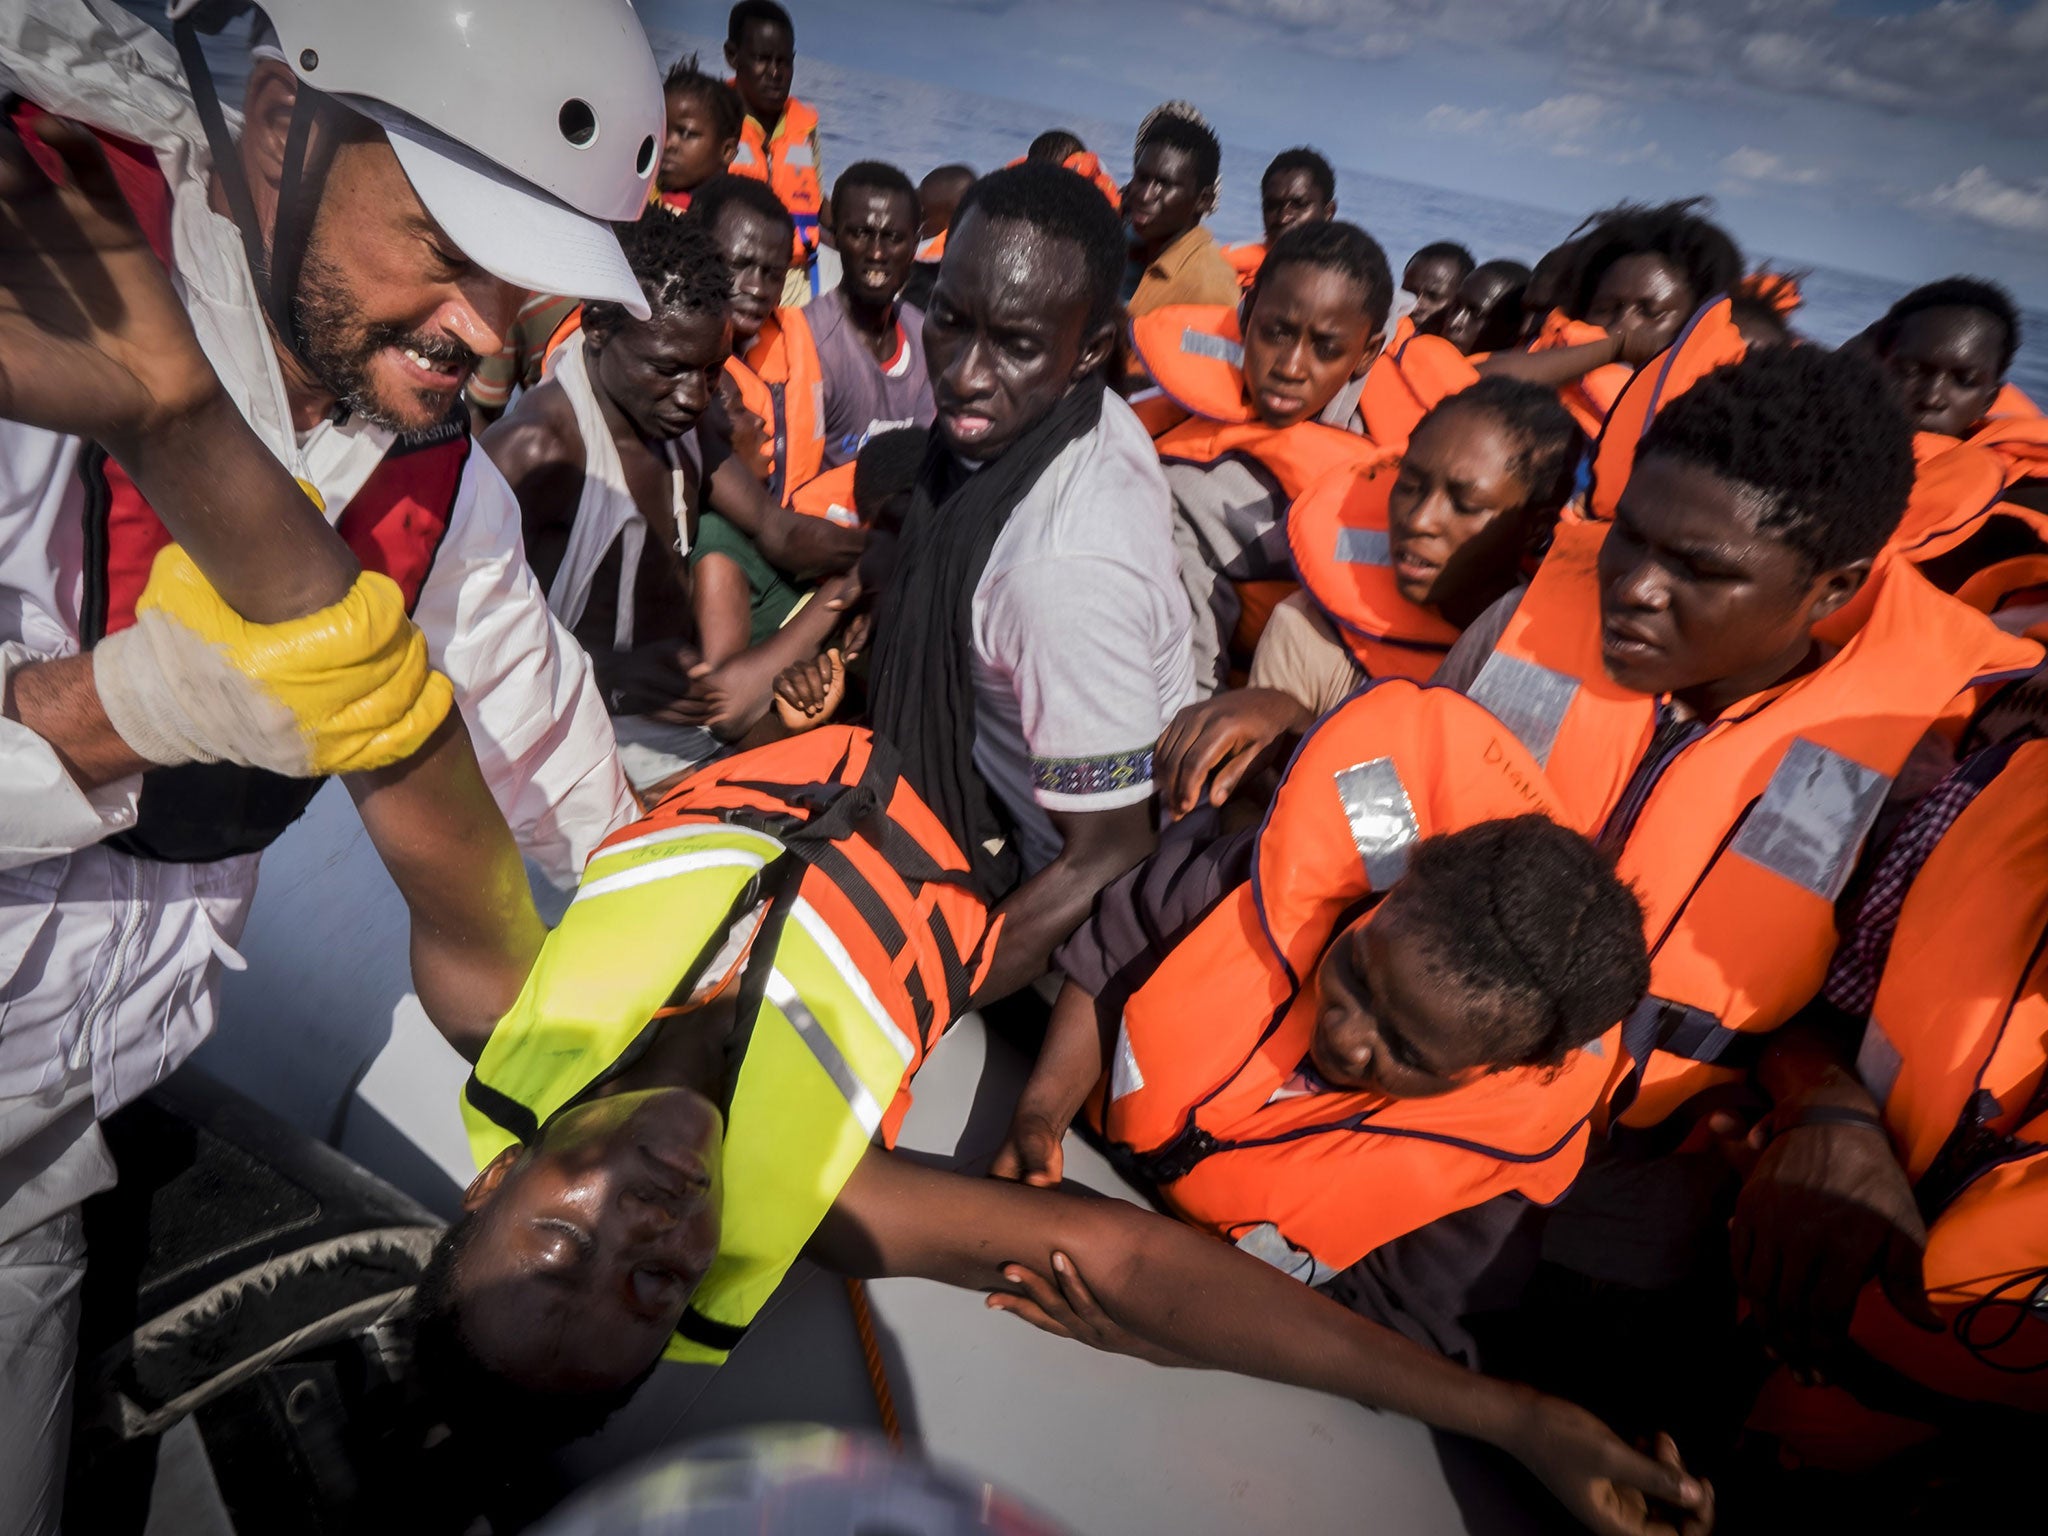 A succession of disasters has made the waters between Libya and Europe the deadliest in the world